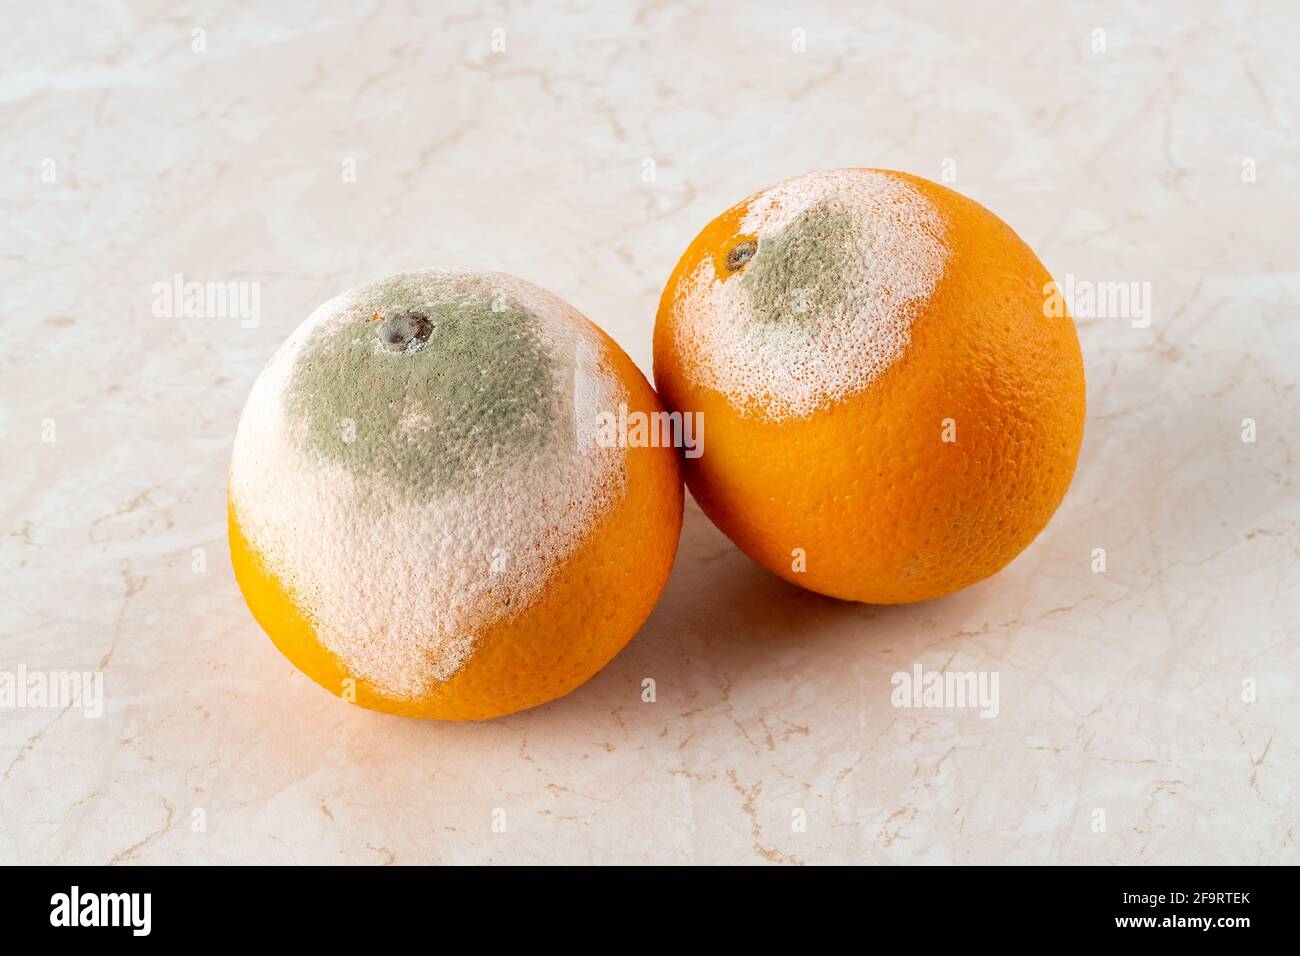 Two rotten oranges covered with white green mold on a kitchen table. Fungal mold on rotten citrus. Spoiled fruits. Food forgotten in the fridge. Stock Photo